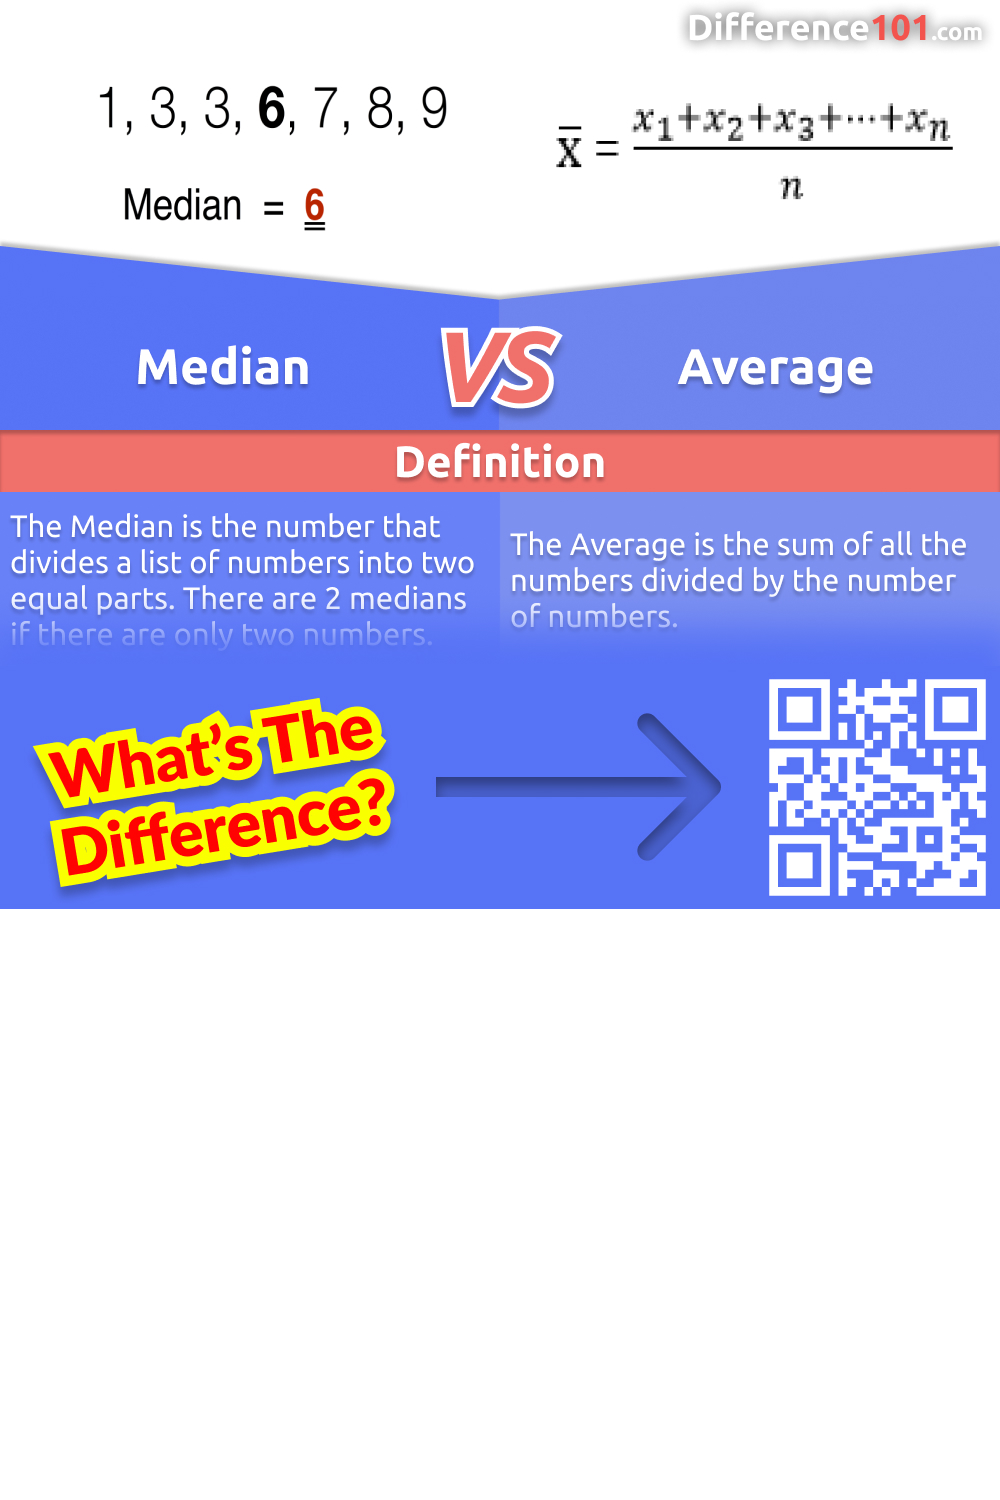 What's the difference between median and average? Both measures are used to provide information about a set of data, but they differ in how they are calculated and what they represent. Read on to learn more.